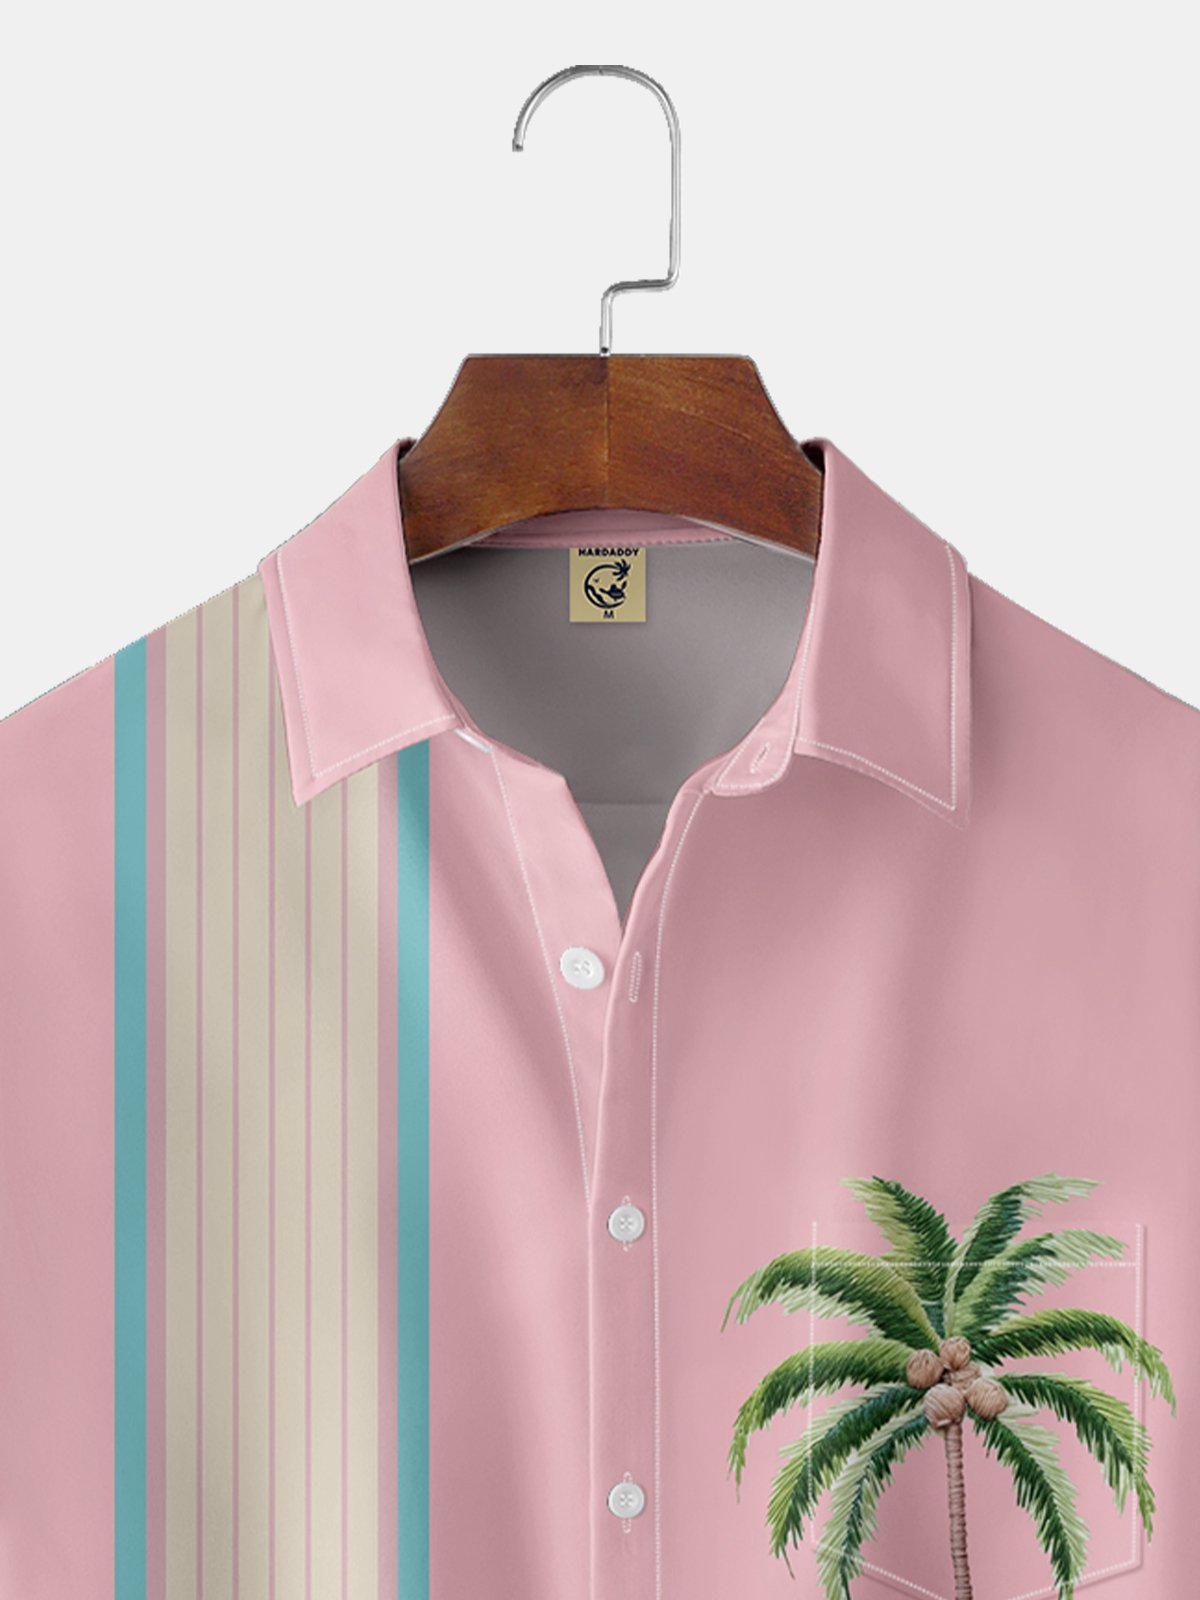 Moisture-wicking Coconut Tree Chest Pocket Bowling Shirt